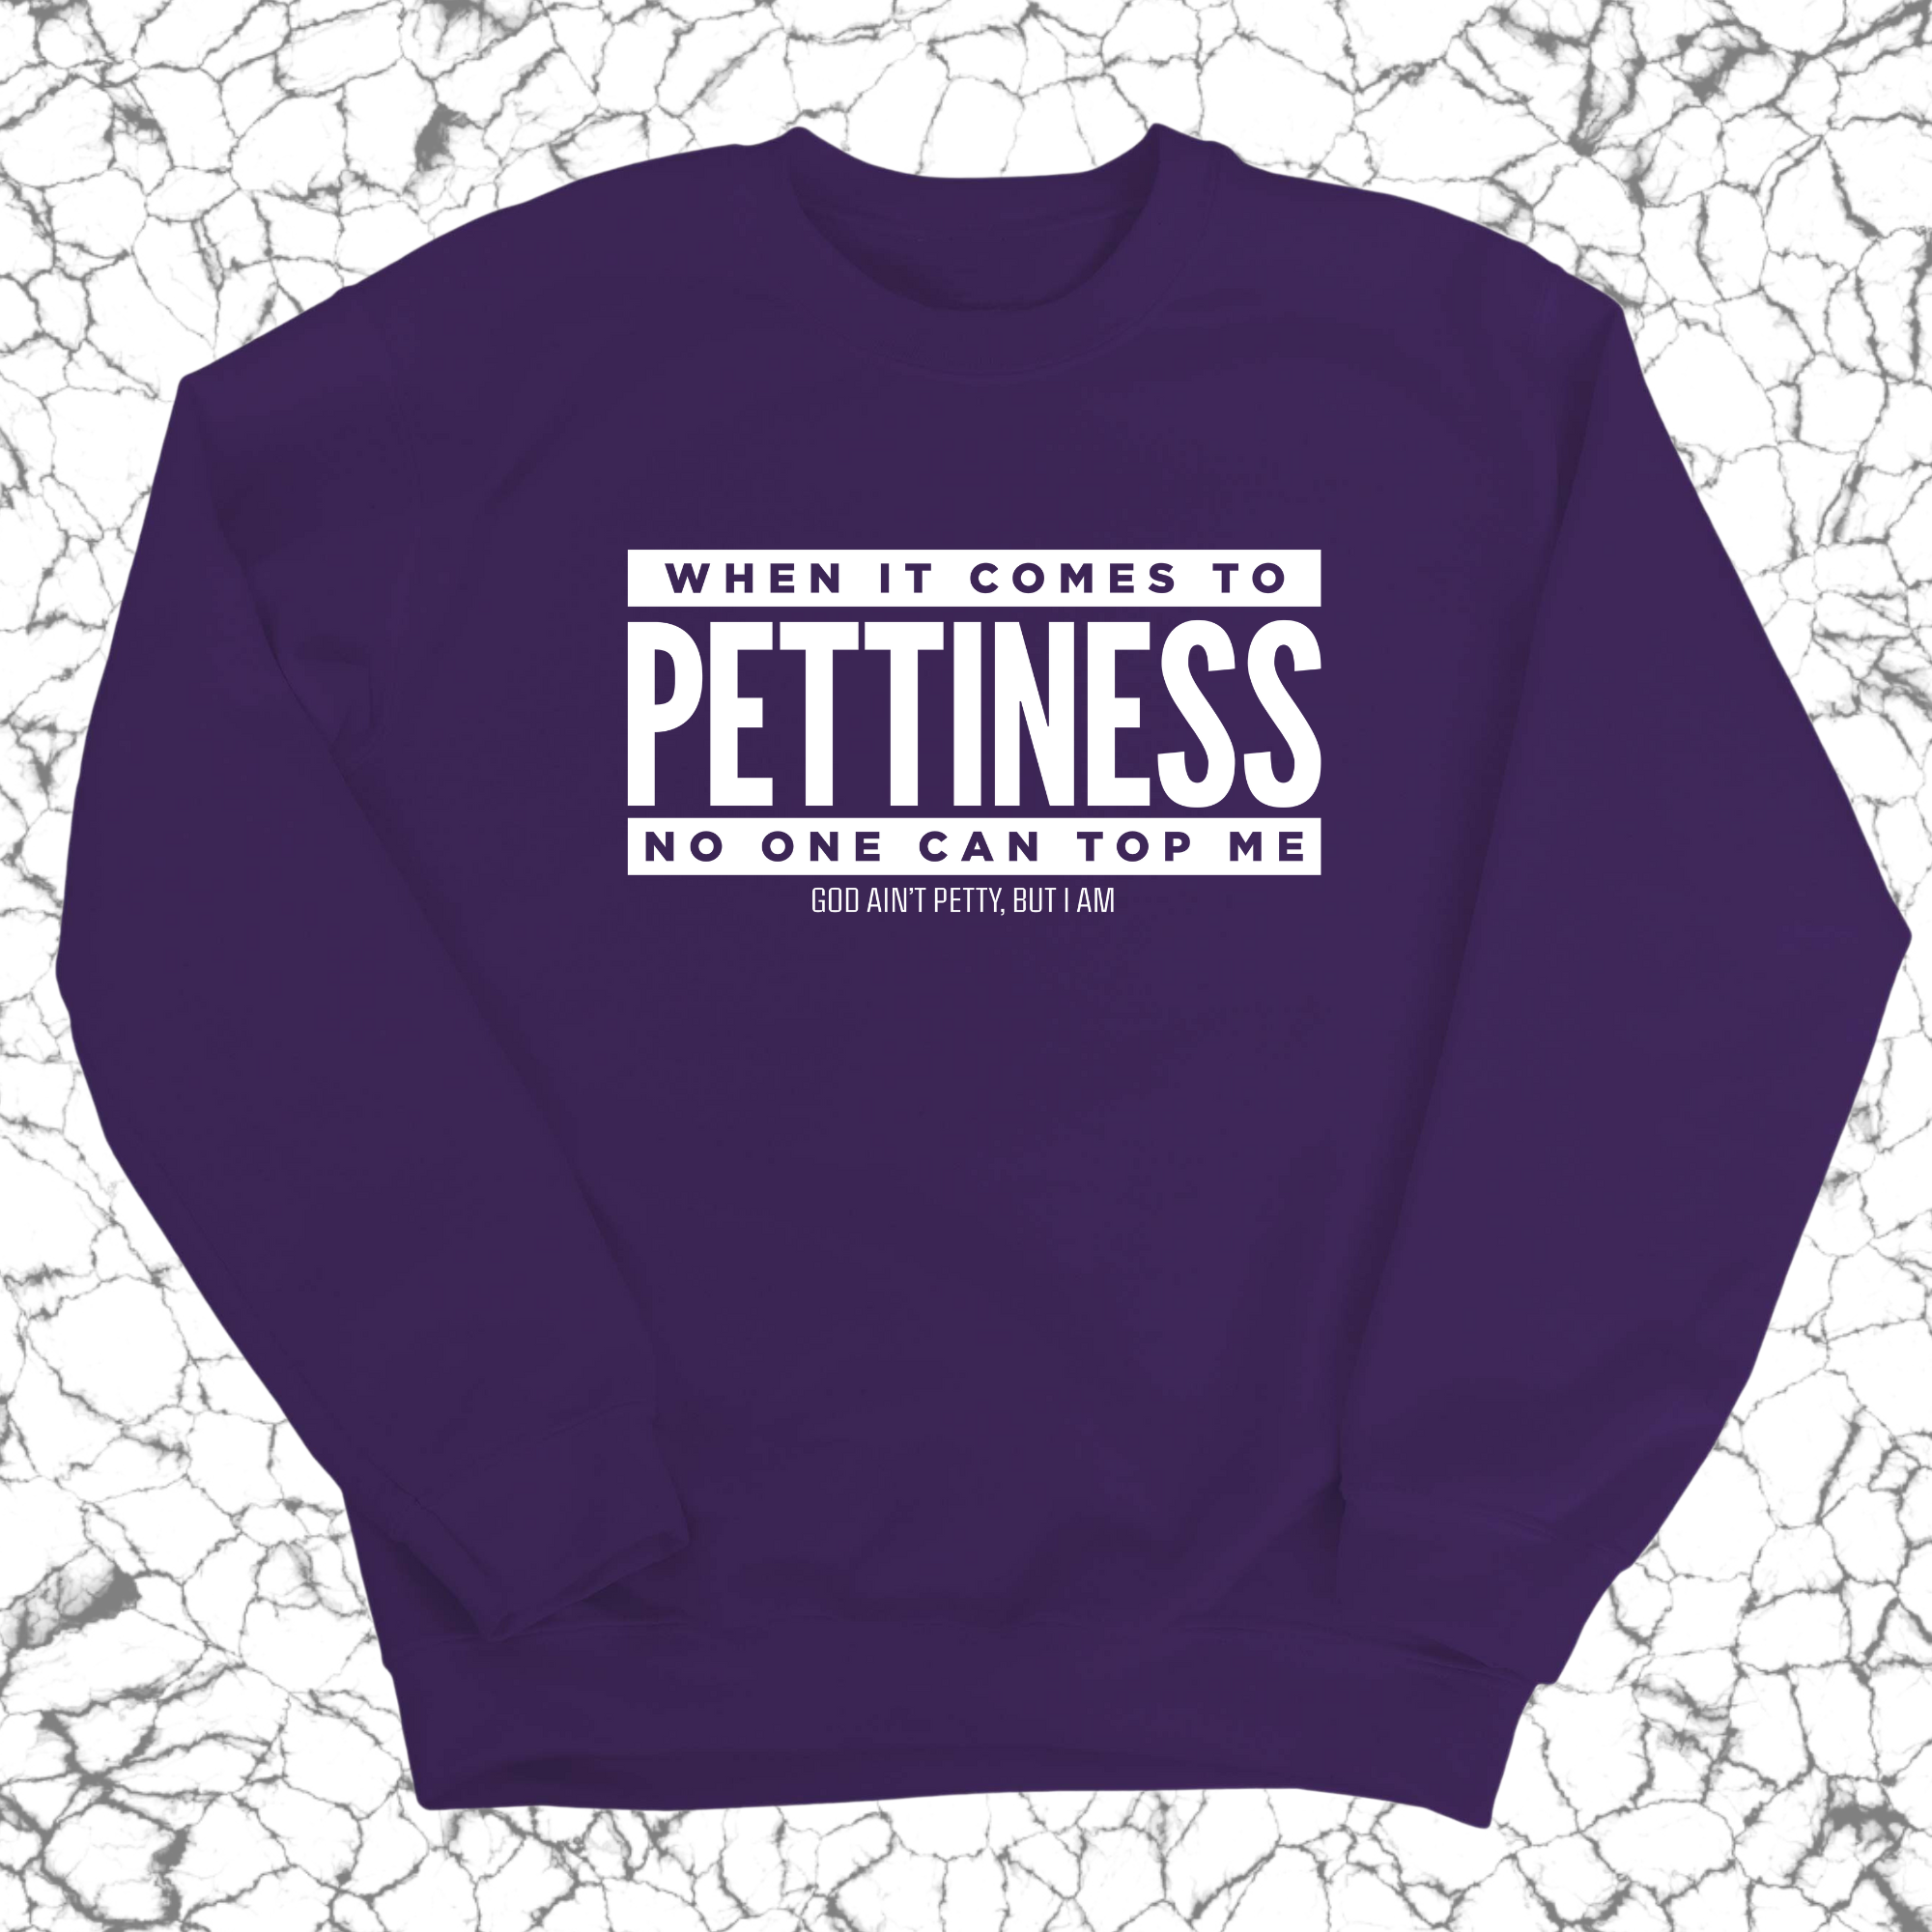 When it comes to Pettiness no one can top me Unisex Sweatshirt-Sweatshirt-The Original God Ain't Petty But I Am